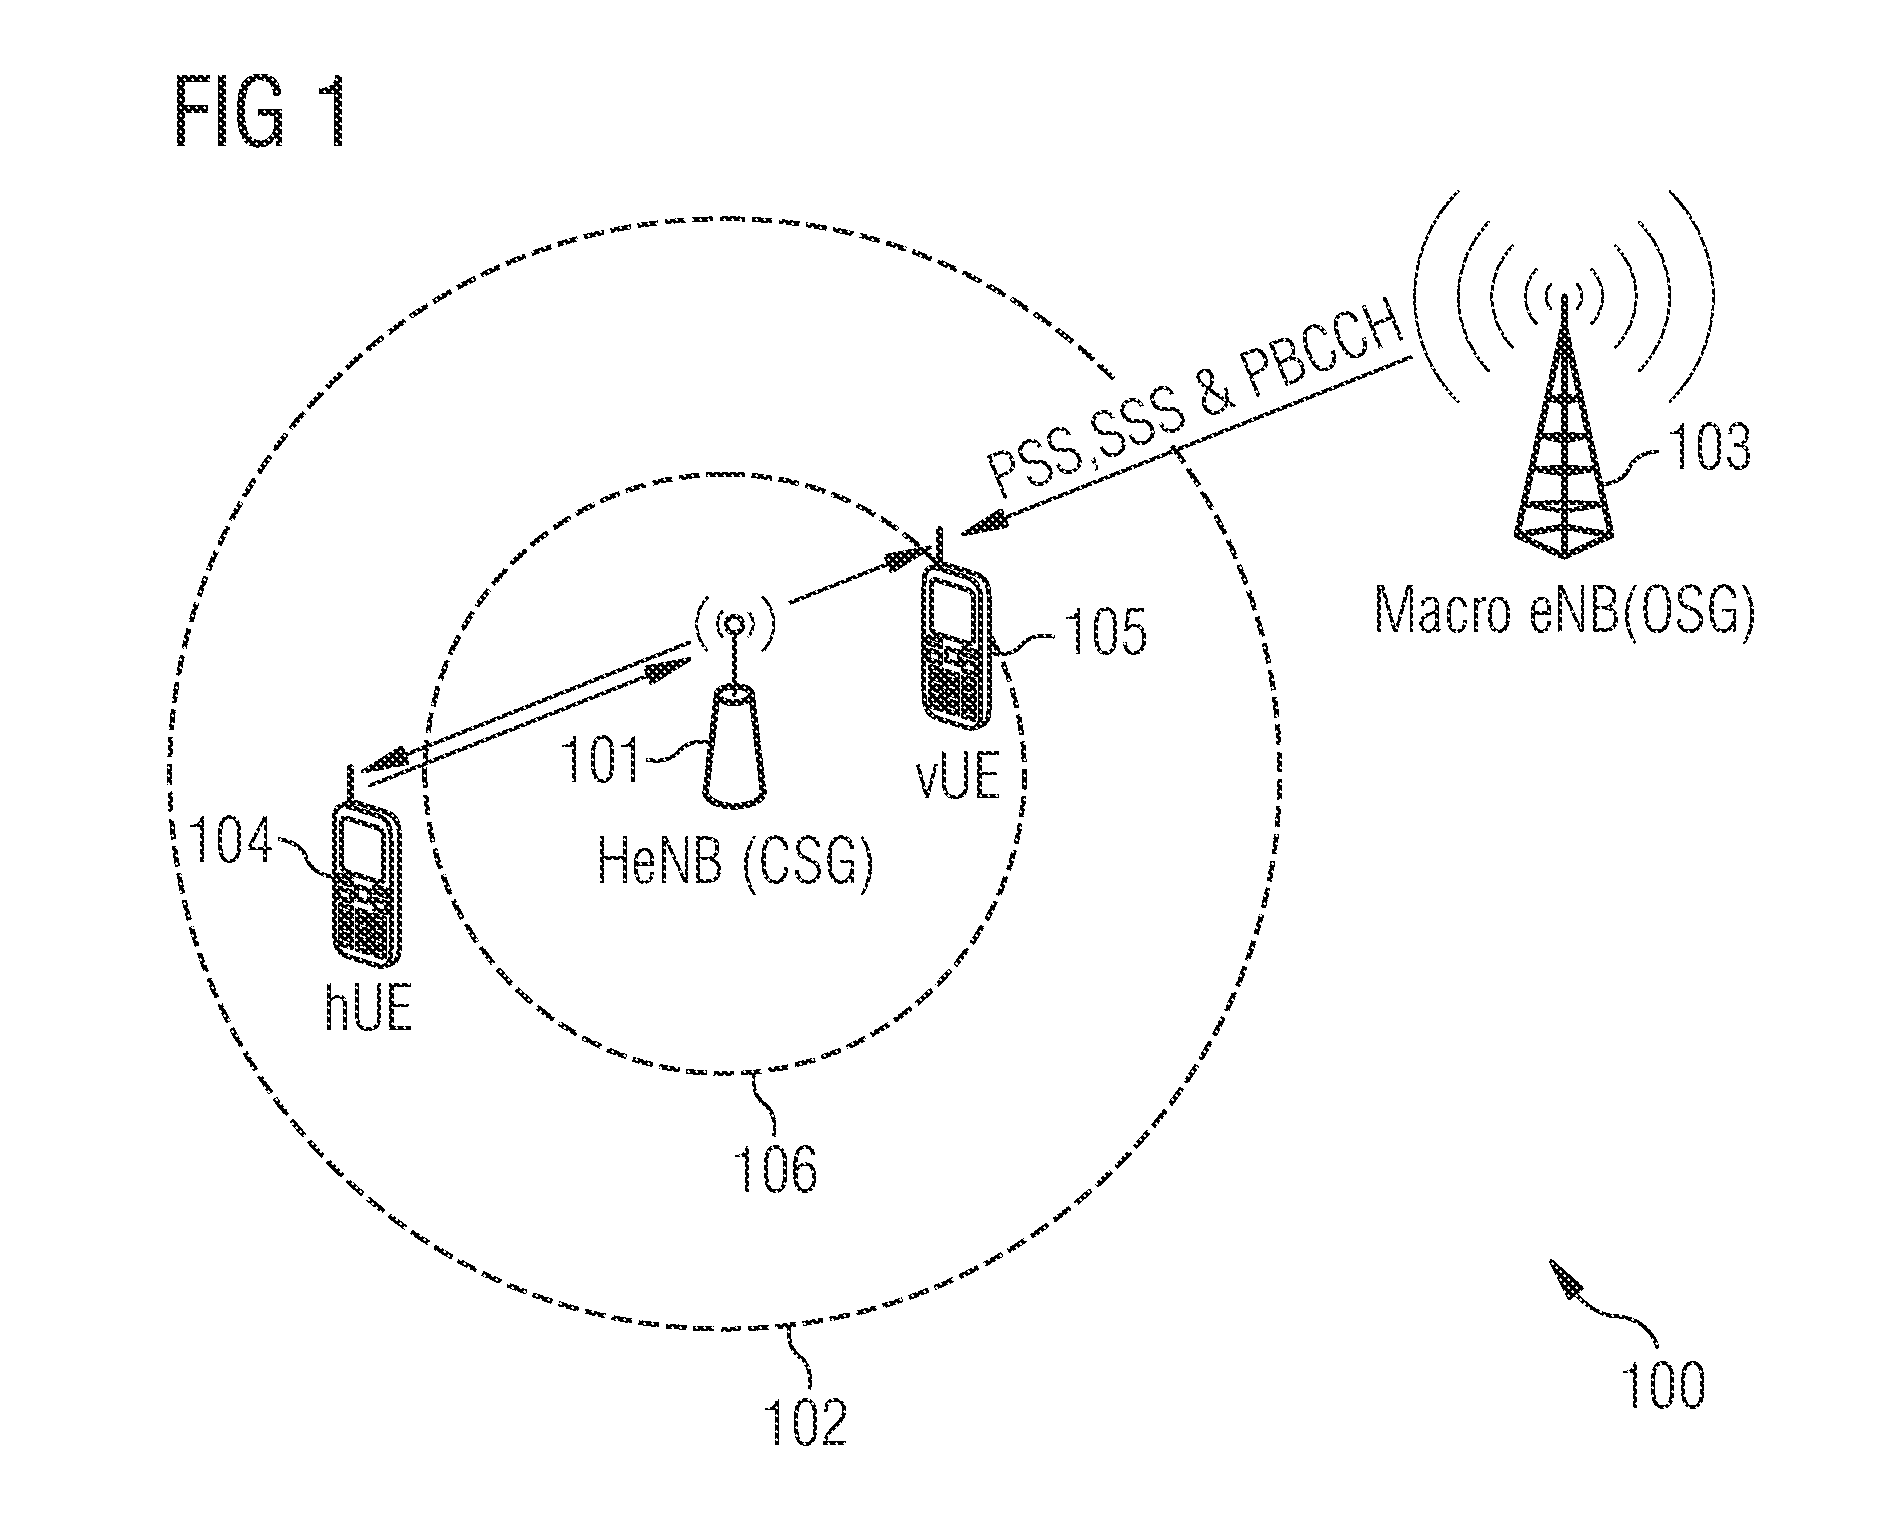 Method for Adapting a Downlink Transmit Power of a First Base Station Adapted for Serving a Closed Subscriber Group in the Presence of Second Base Station